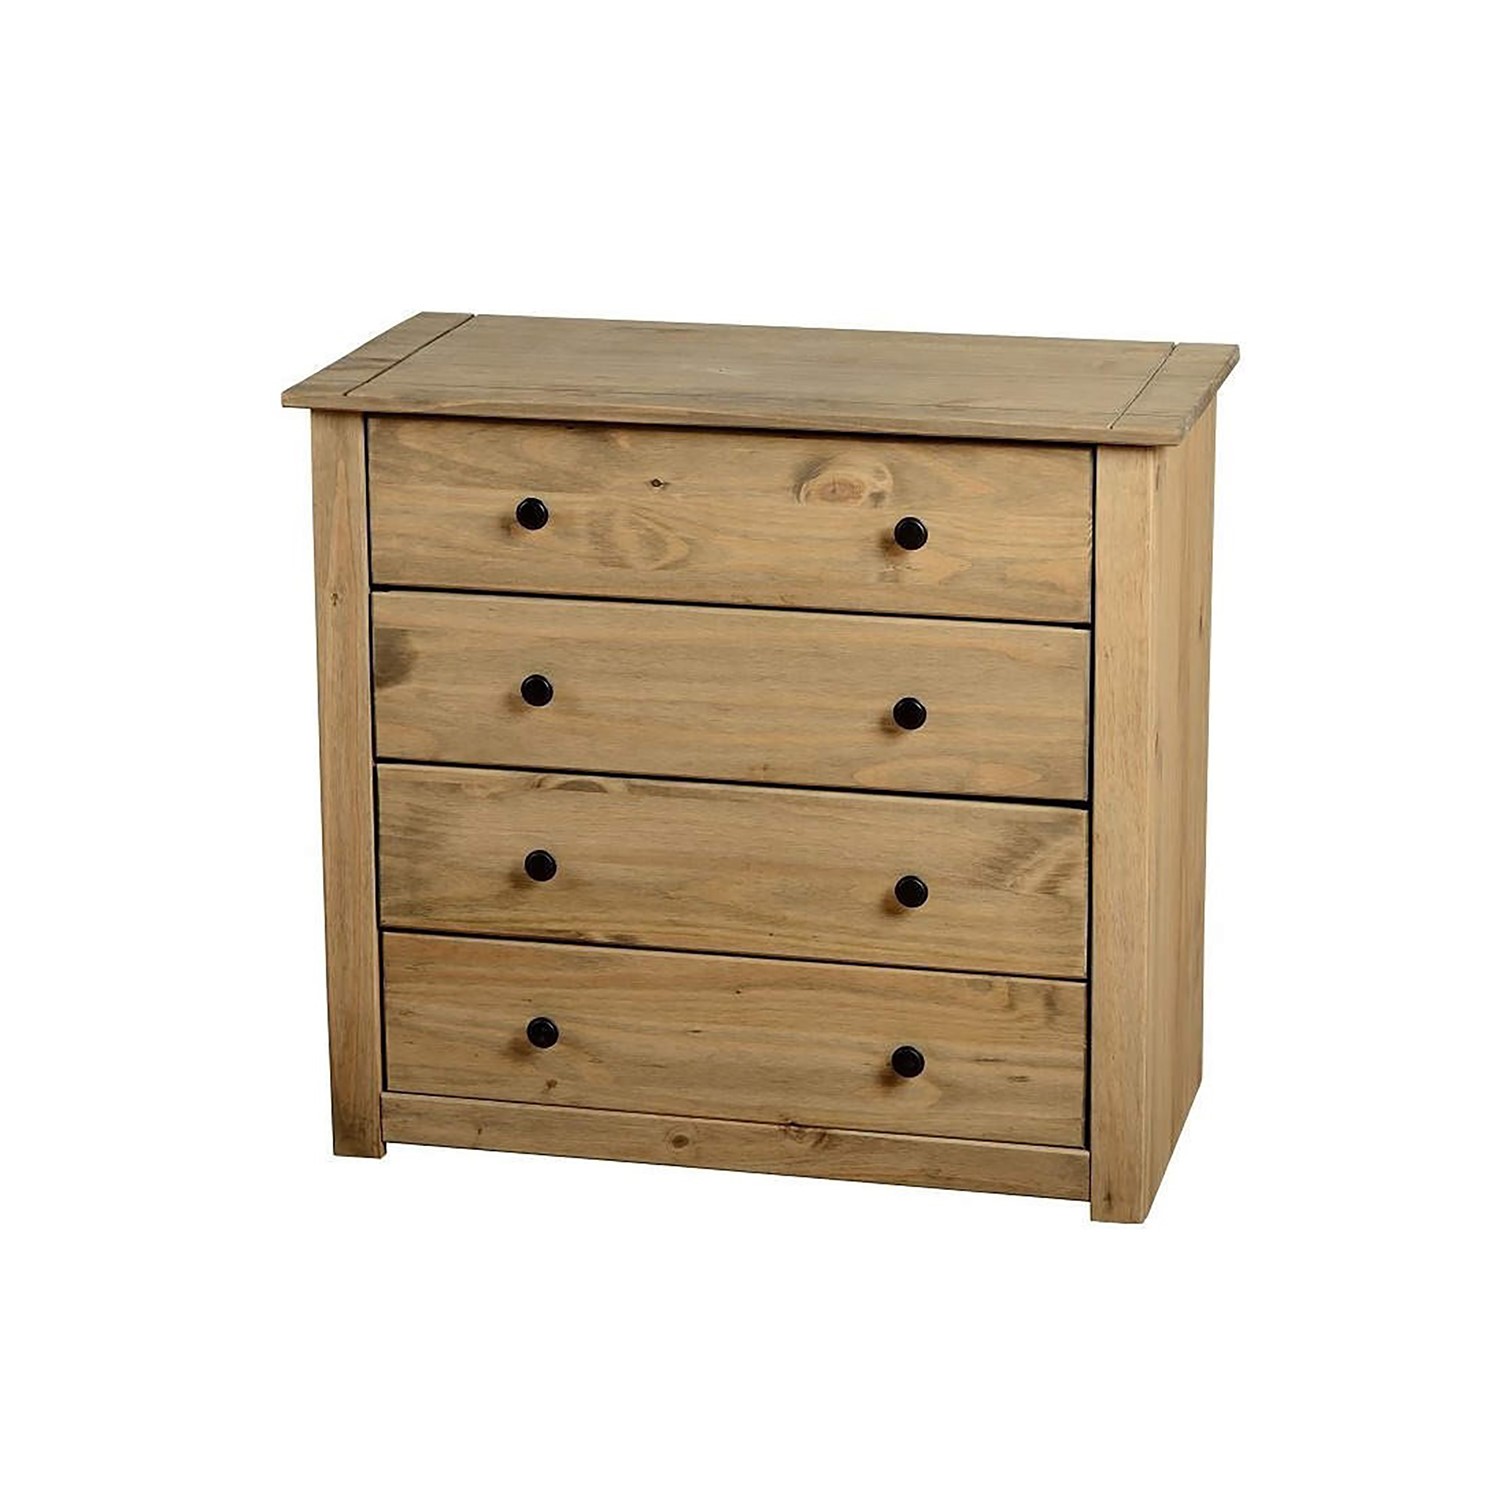 Photo of Solid pine rustic chest of 4 drawers - panama - seconique